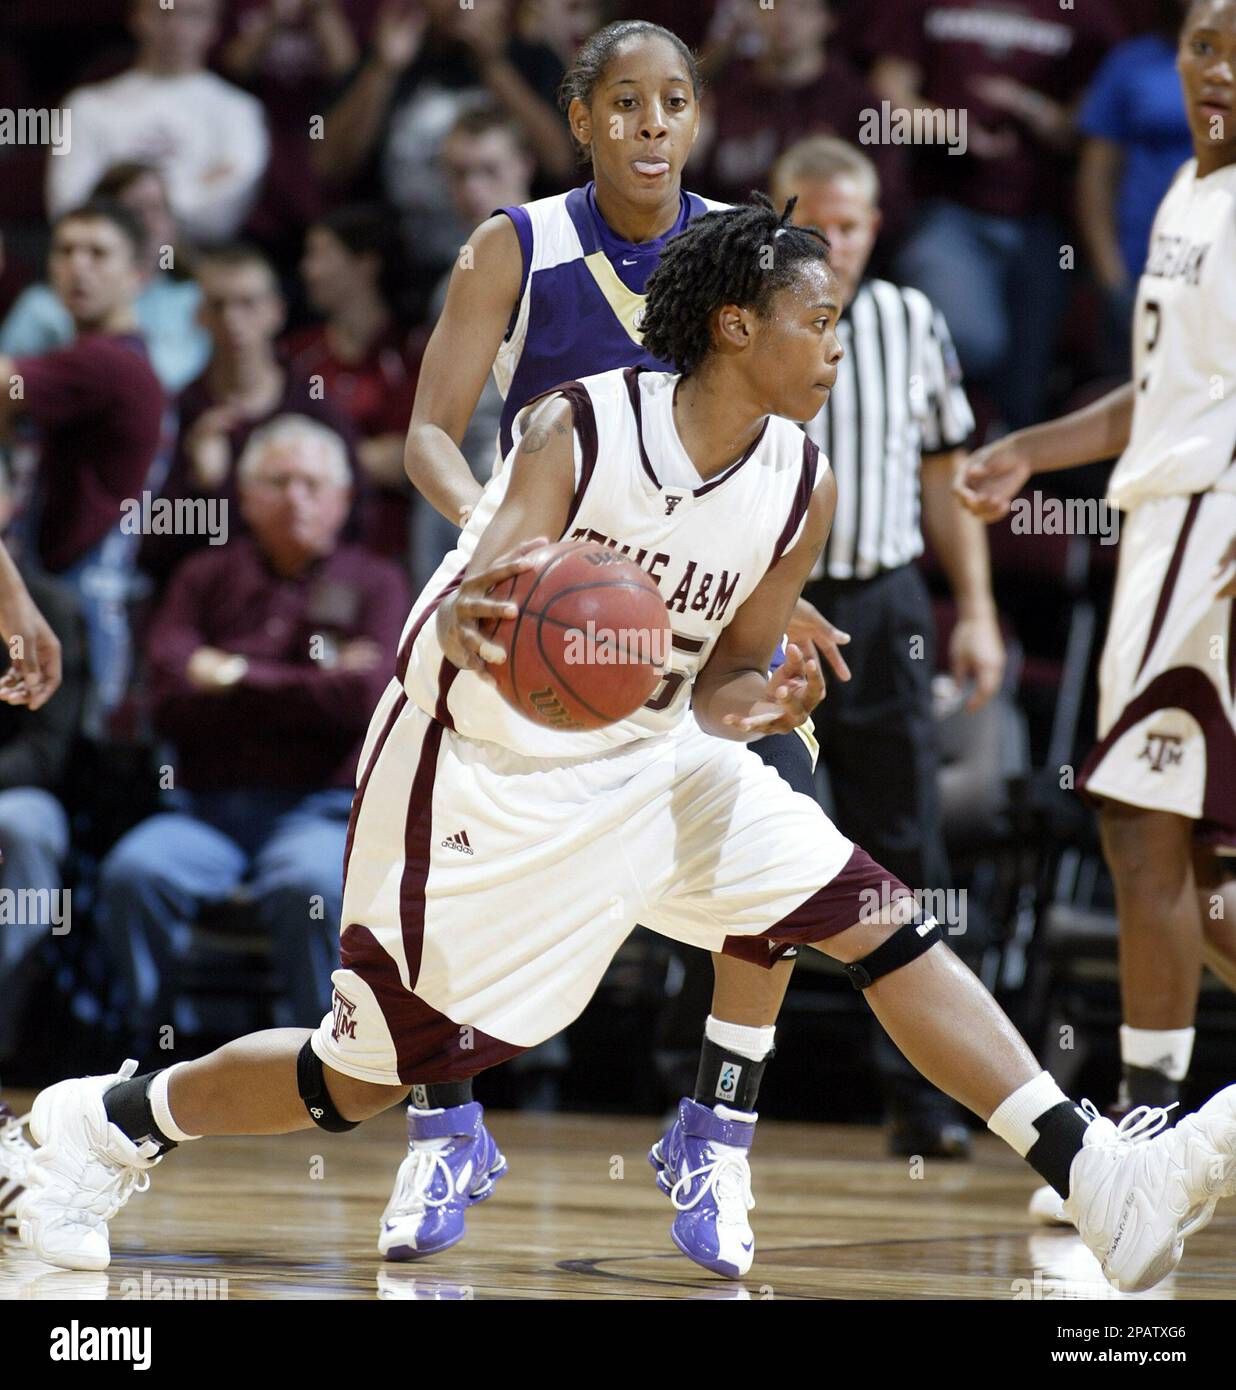 Texas A&M's Danielle Gant is covered by Prairie View A&M's Candice Thomas  during the second half of their basketball game Thursday, Nov. 15, 2007 at  Reed Arena in College Station, Texas. (AP